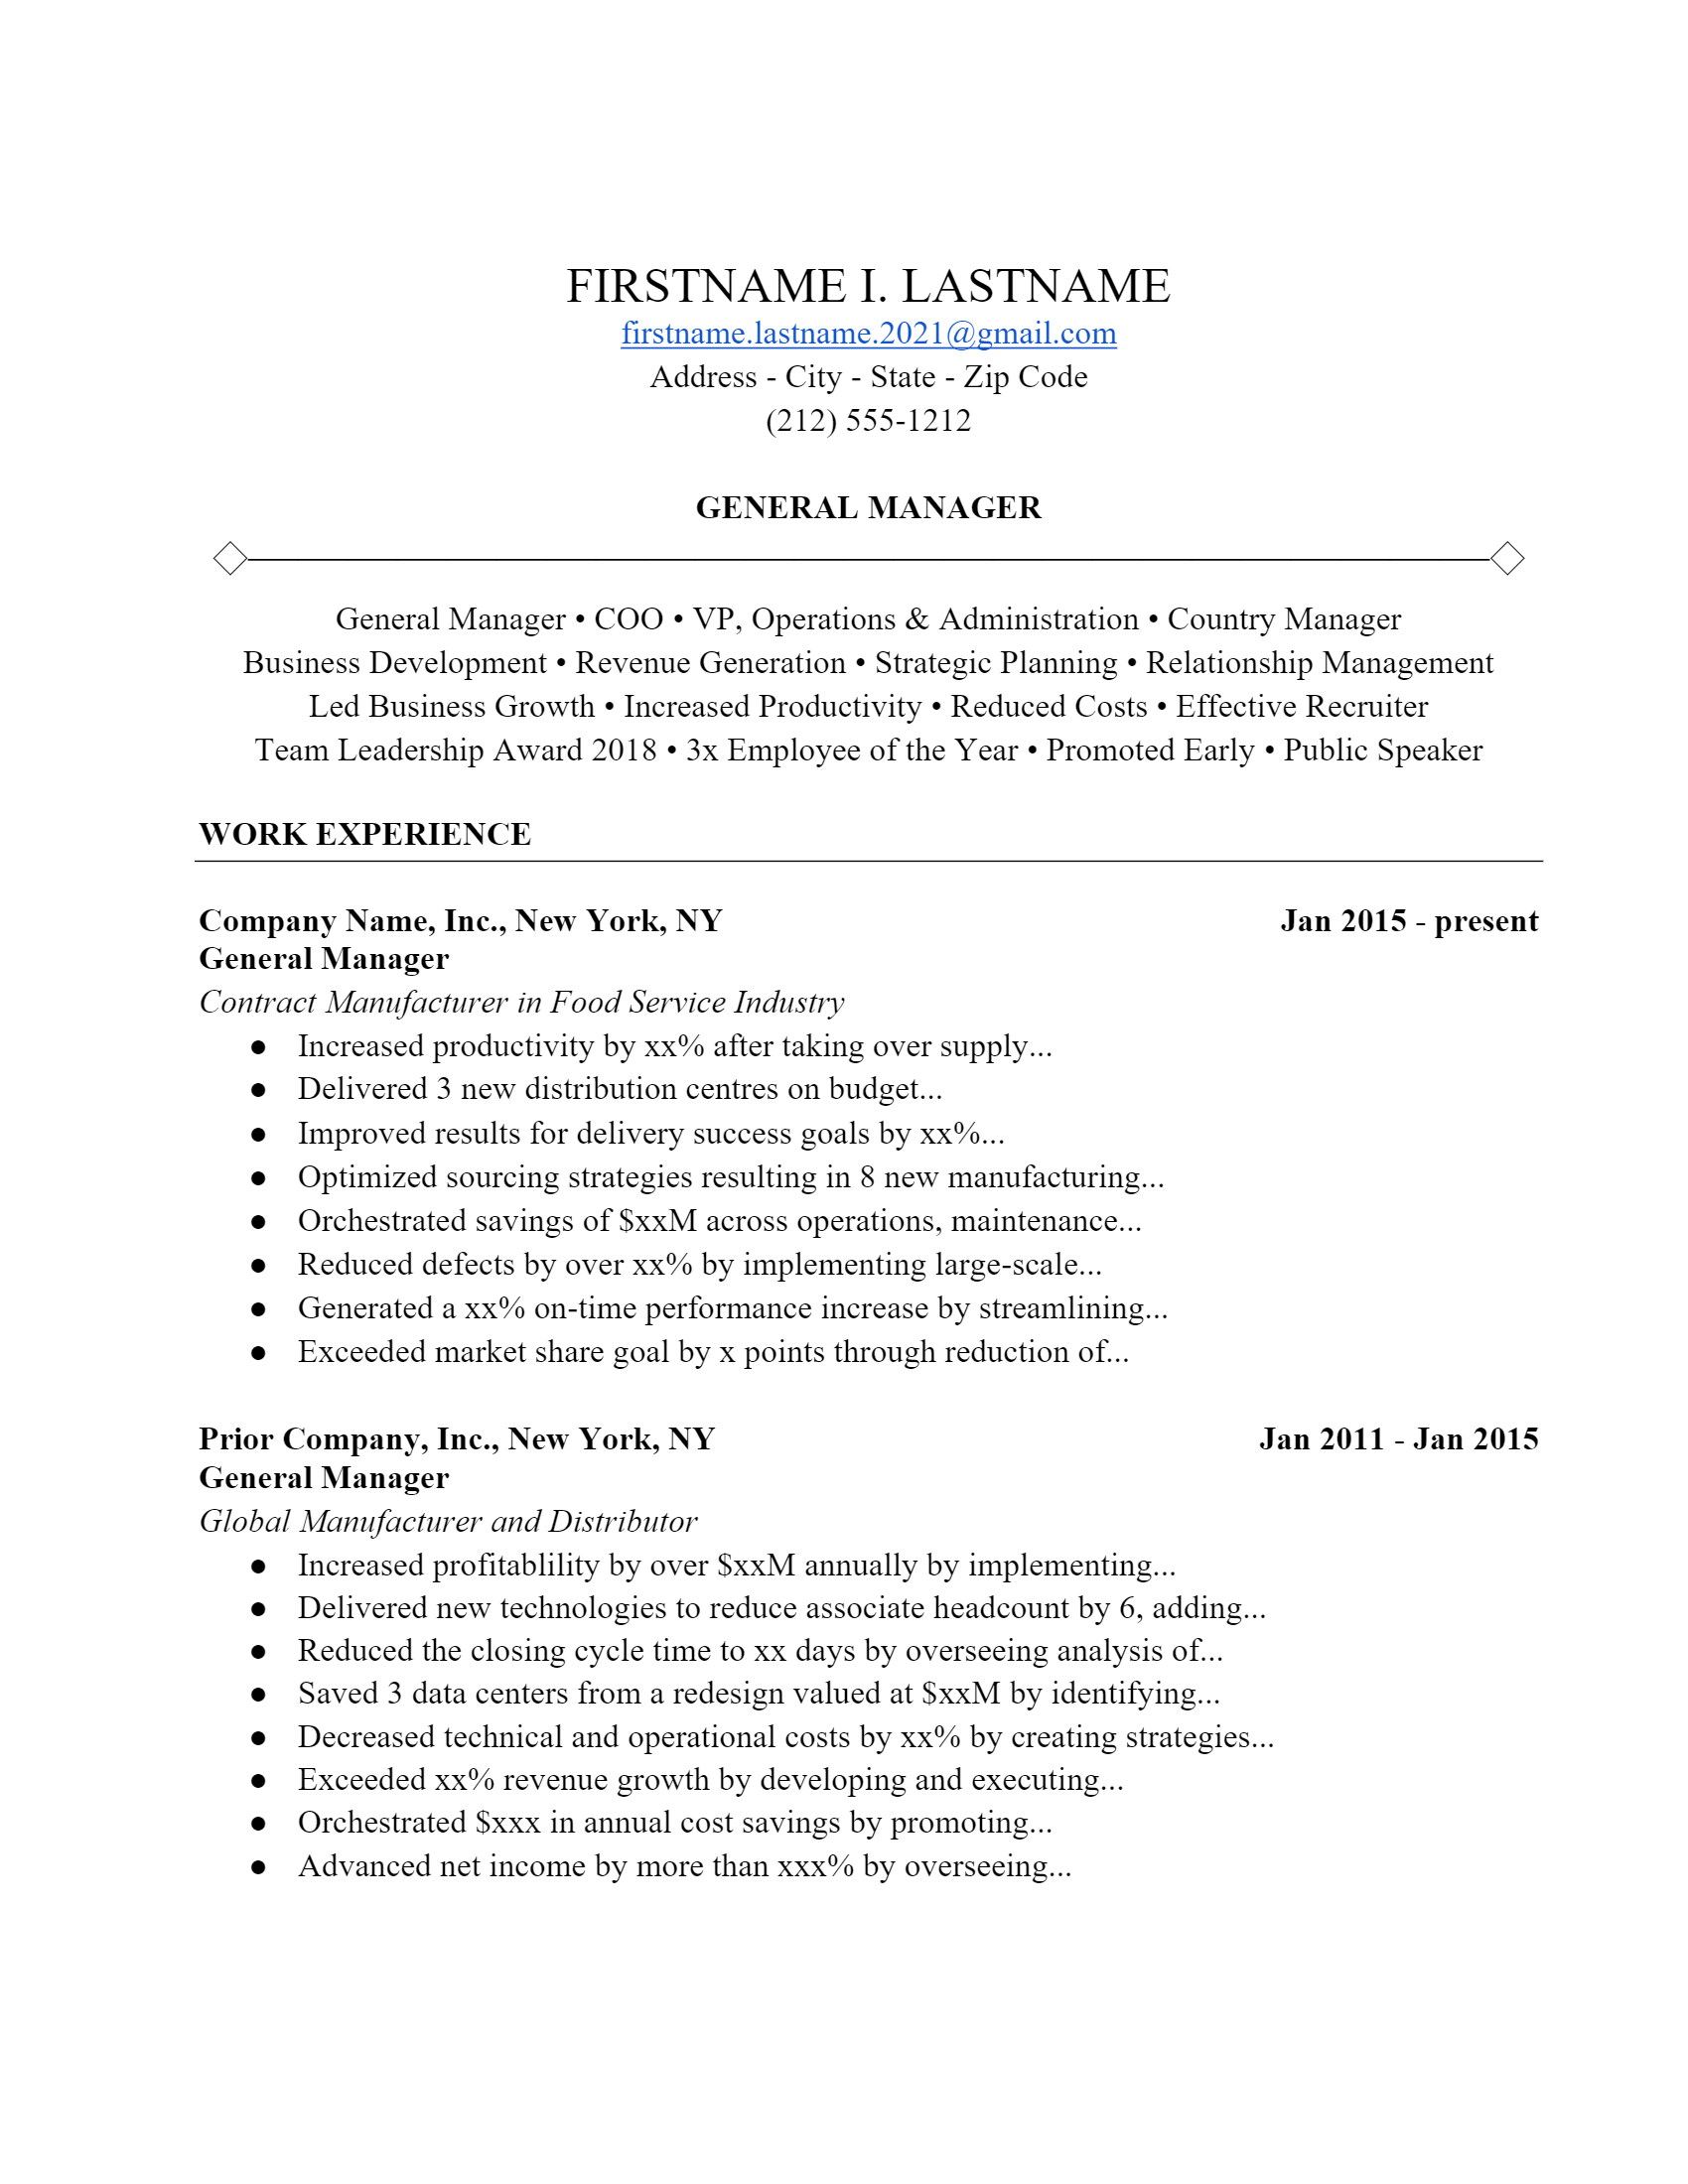 General Manager Resume .Docx (Word)